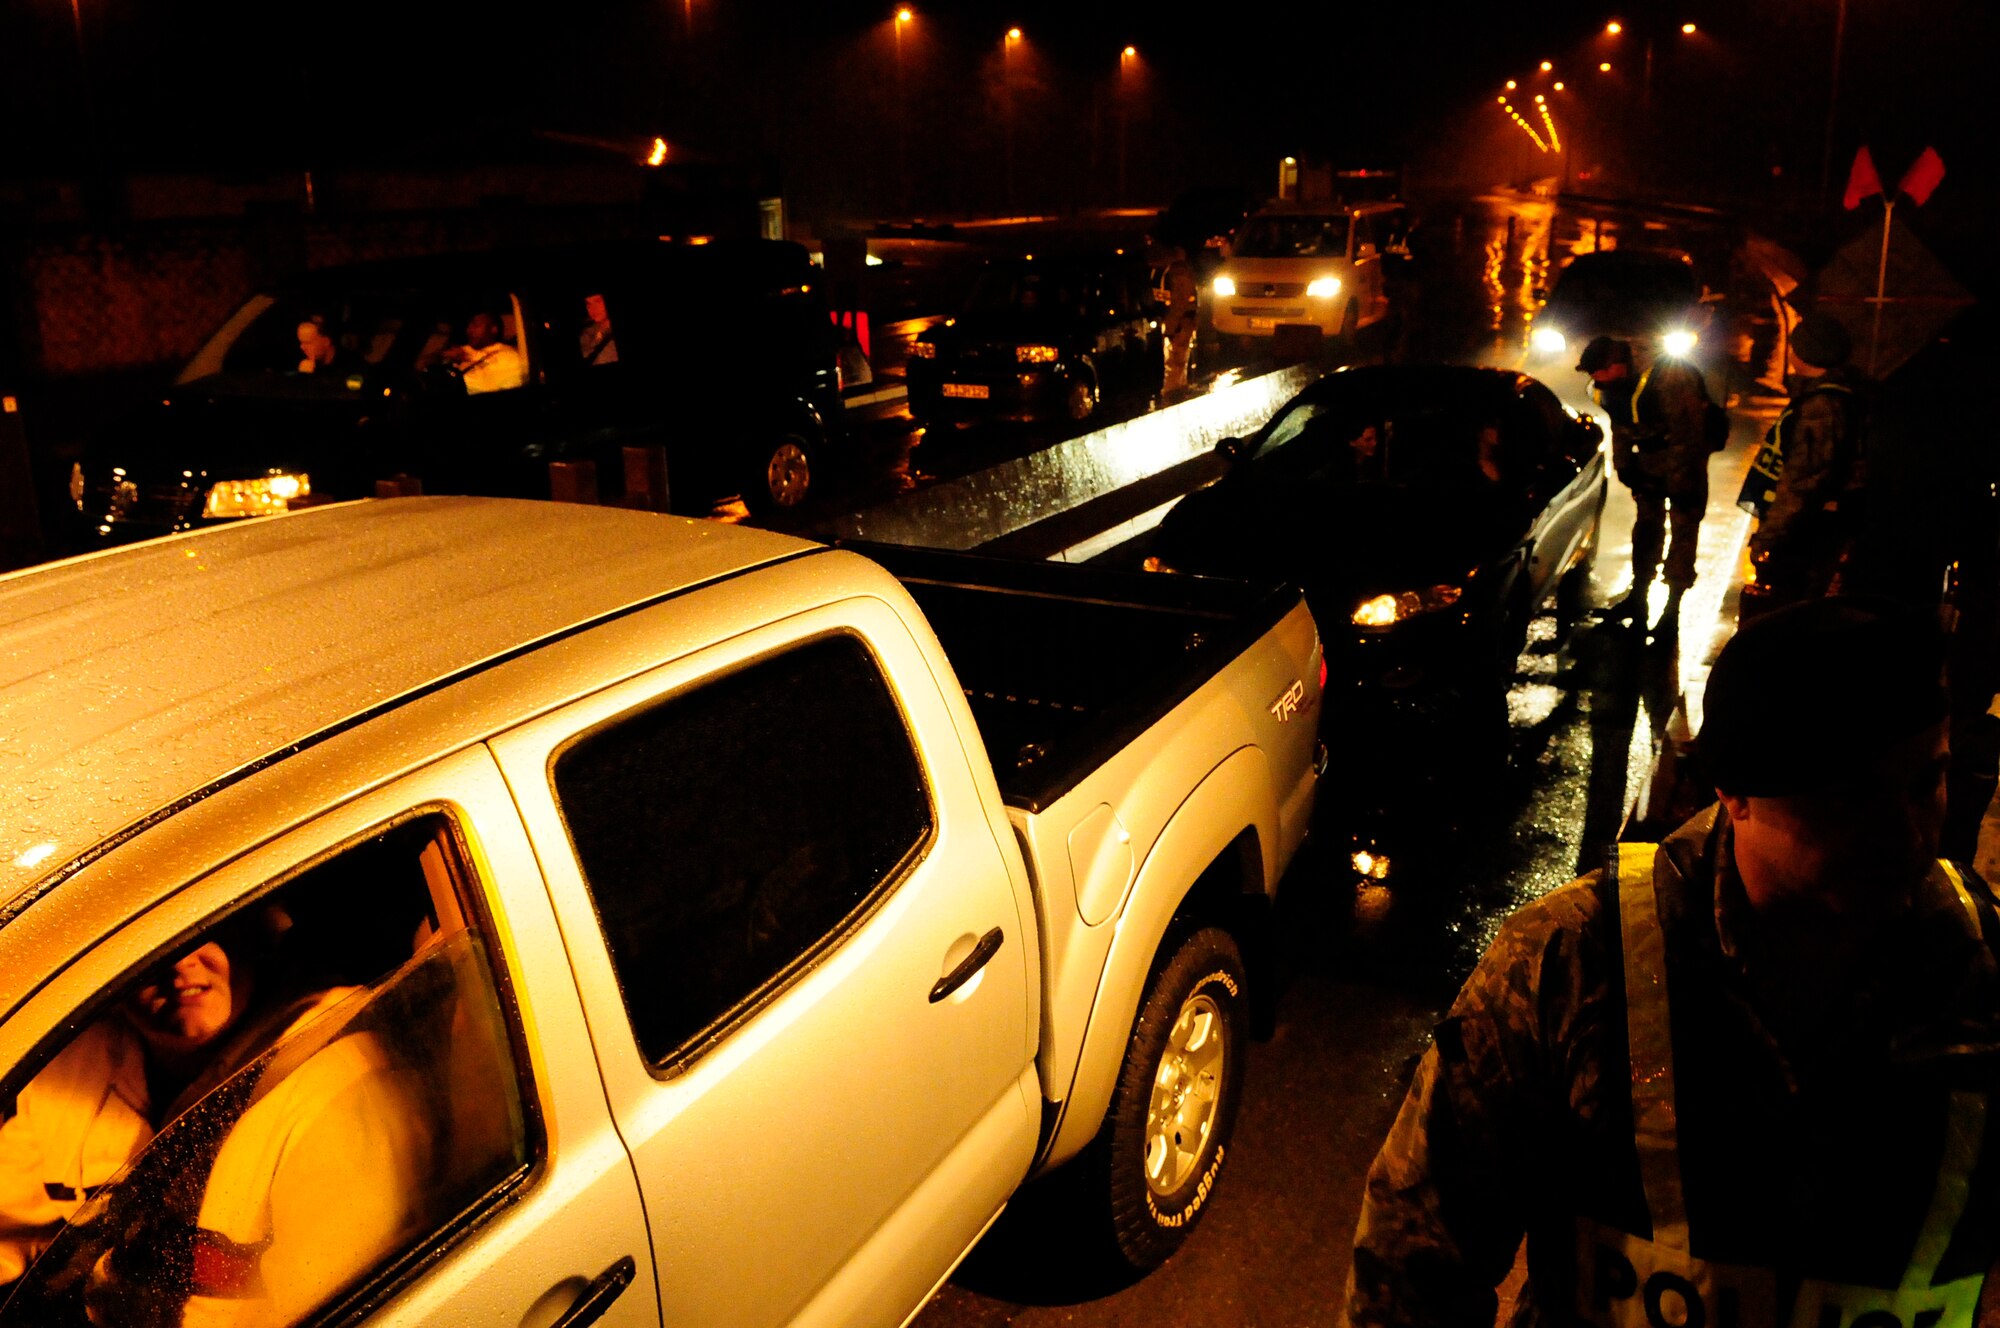 Visitors and residents pass through a sobriety checkpoint Feb. 7, 2009, at Ramstein Air Base. Sobriety checkpoints are held randomly throughout the Kaiserslautern Military Community in an effort to enforce a zero-tolerance policy against driving under the influence of drugs and alcohol. (U.S. Air Force photo by Staff Sgt. Stephen J. Otero) 